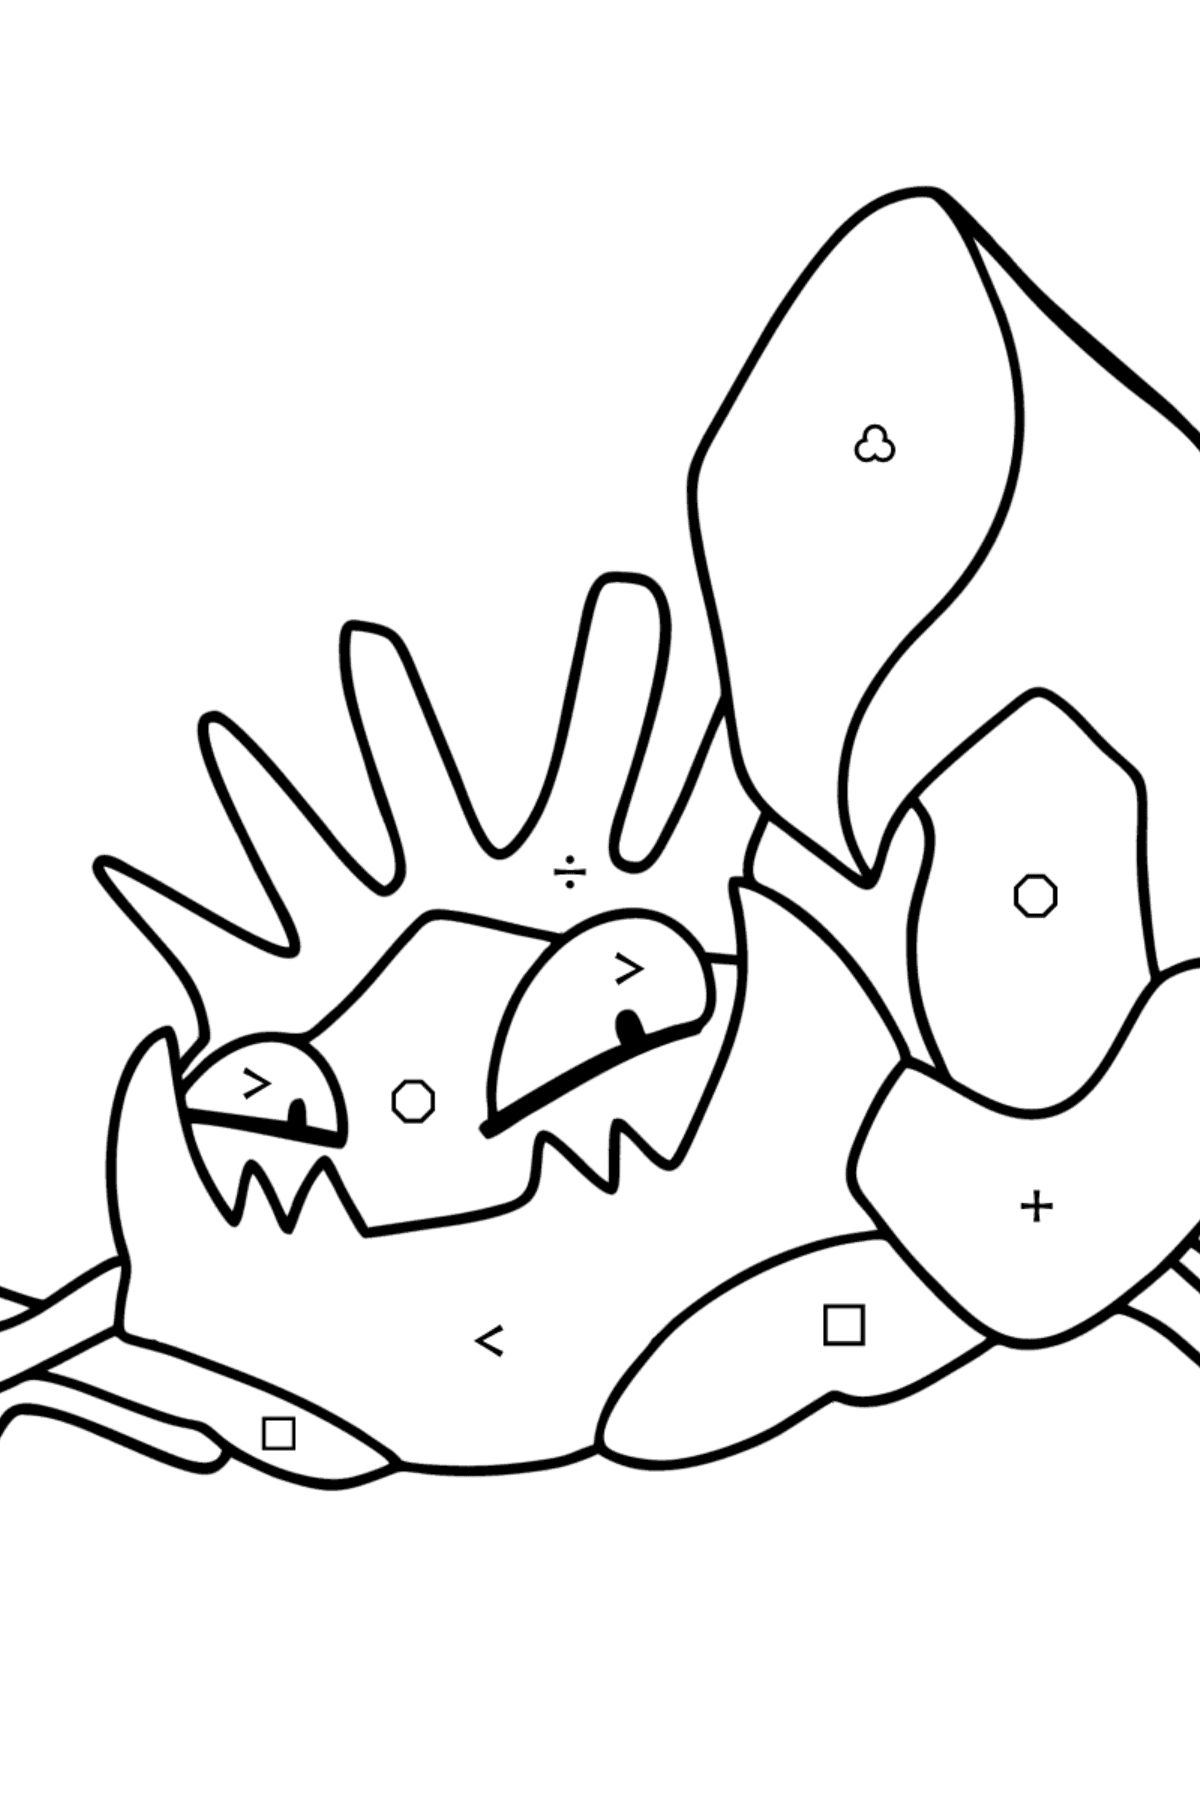 Pokemon Go Kingler coloring page - Coloring by Symbols and Geometric Shapes for Kids